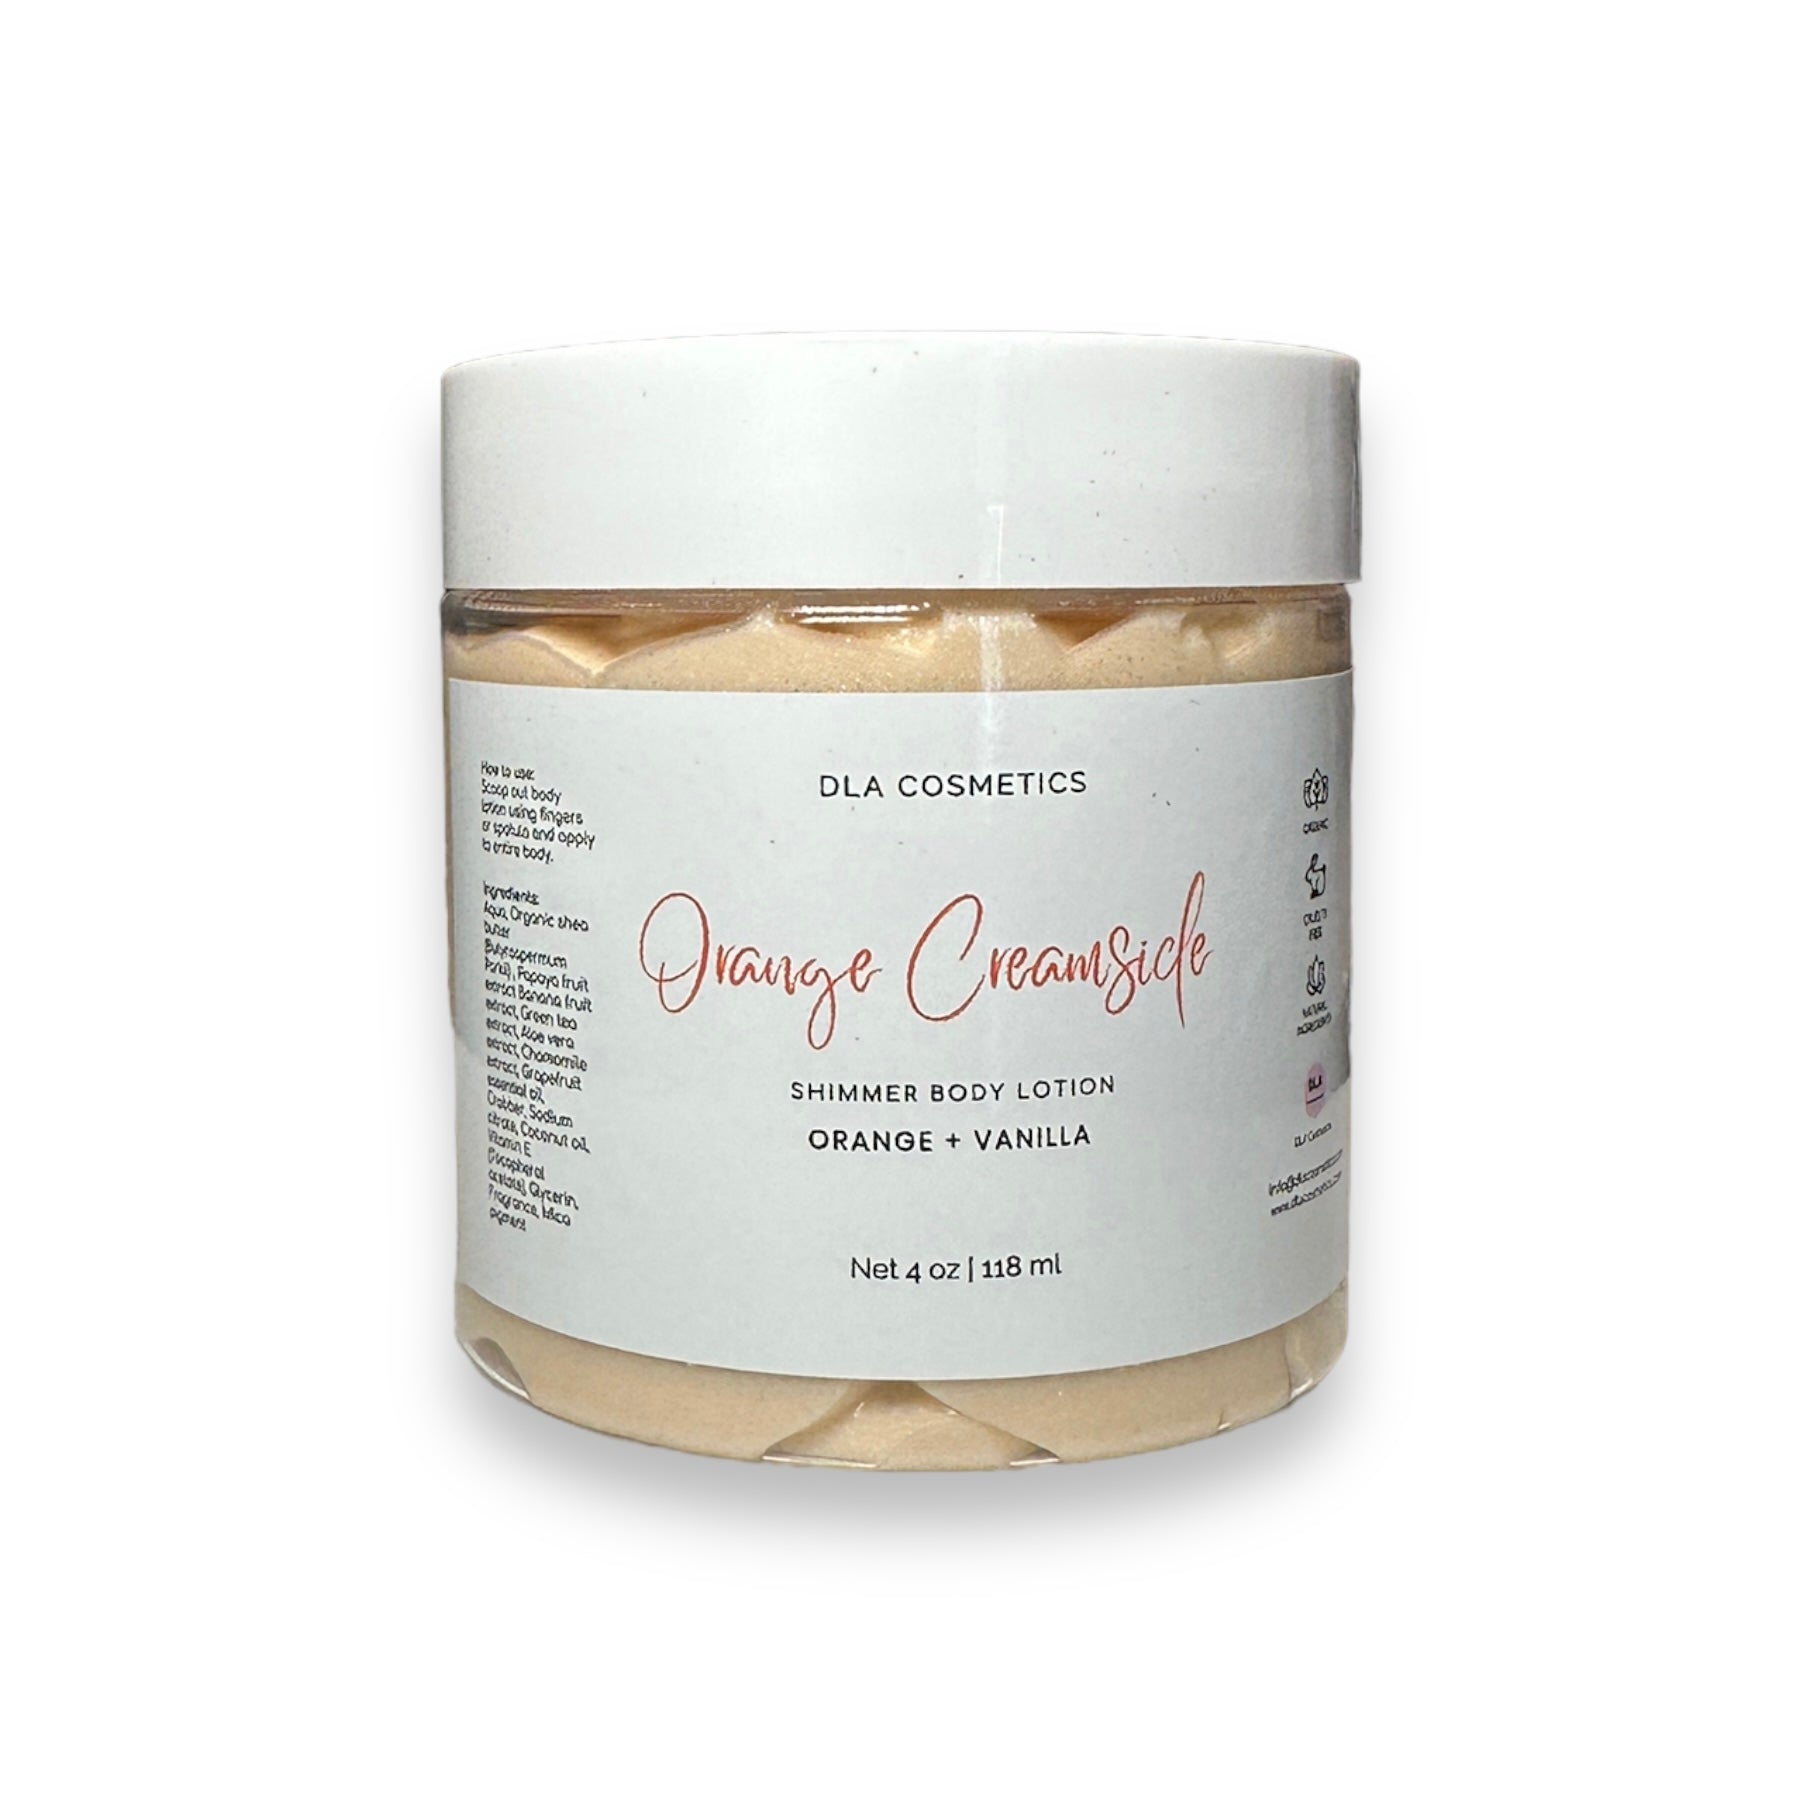 BODY ORANGE CREAMSICLE BODY BUTTER - DLA Cosmetics-Skin care products